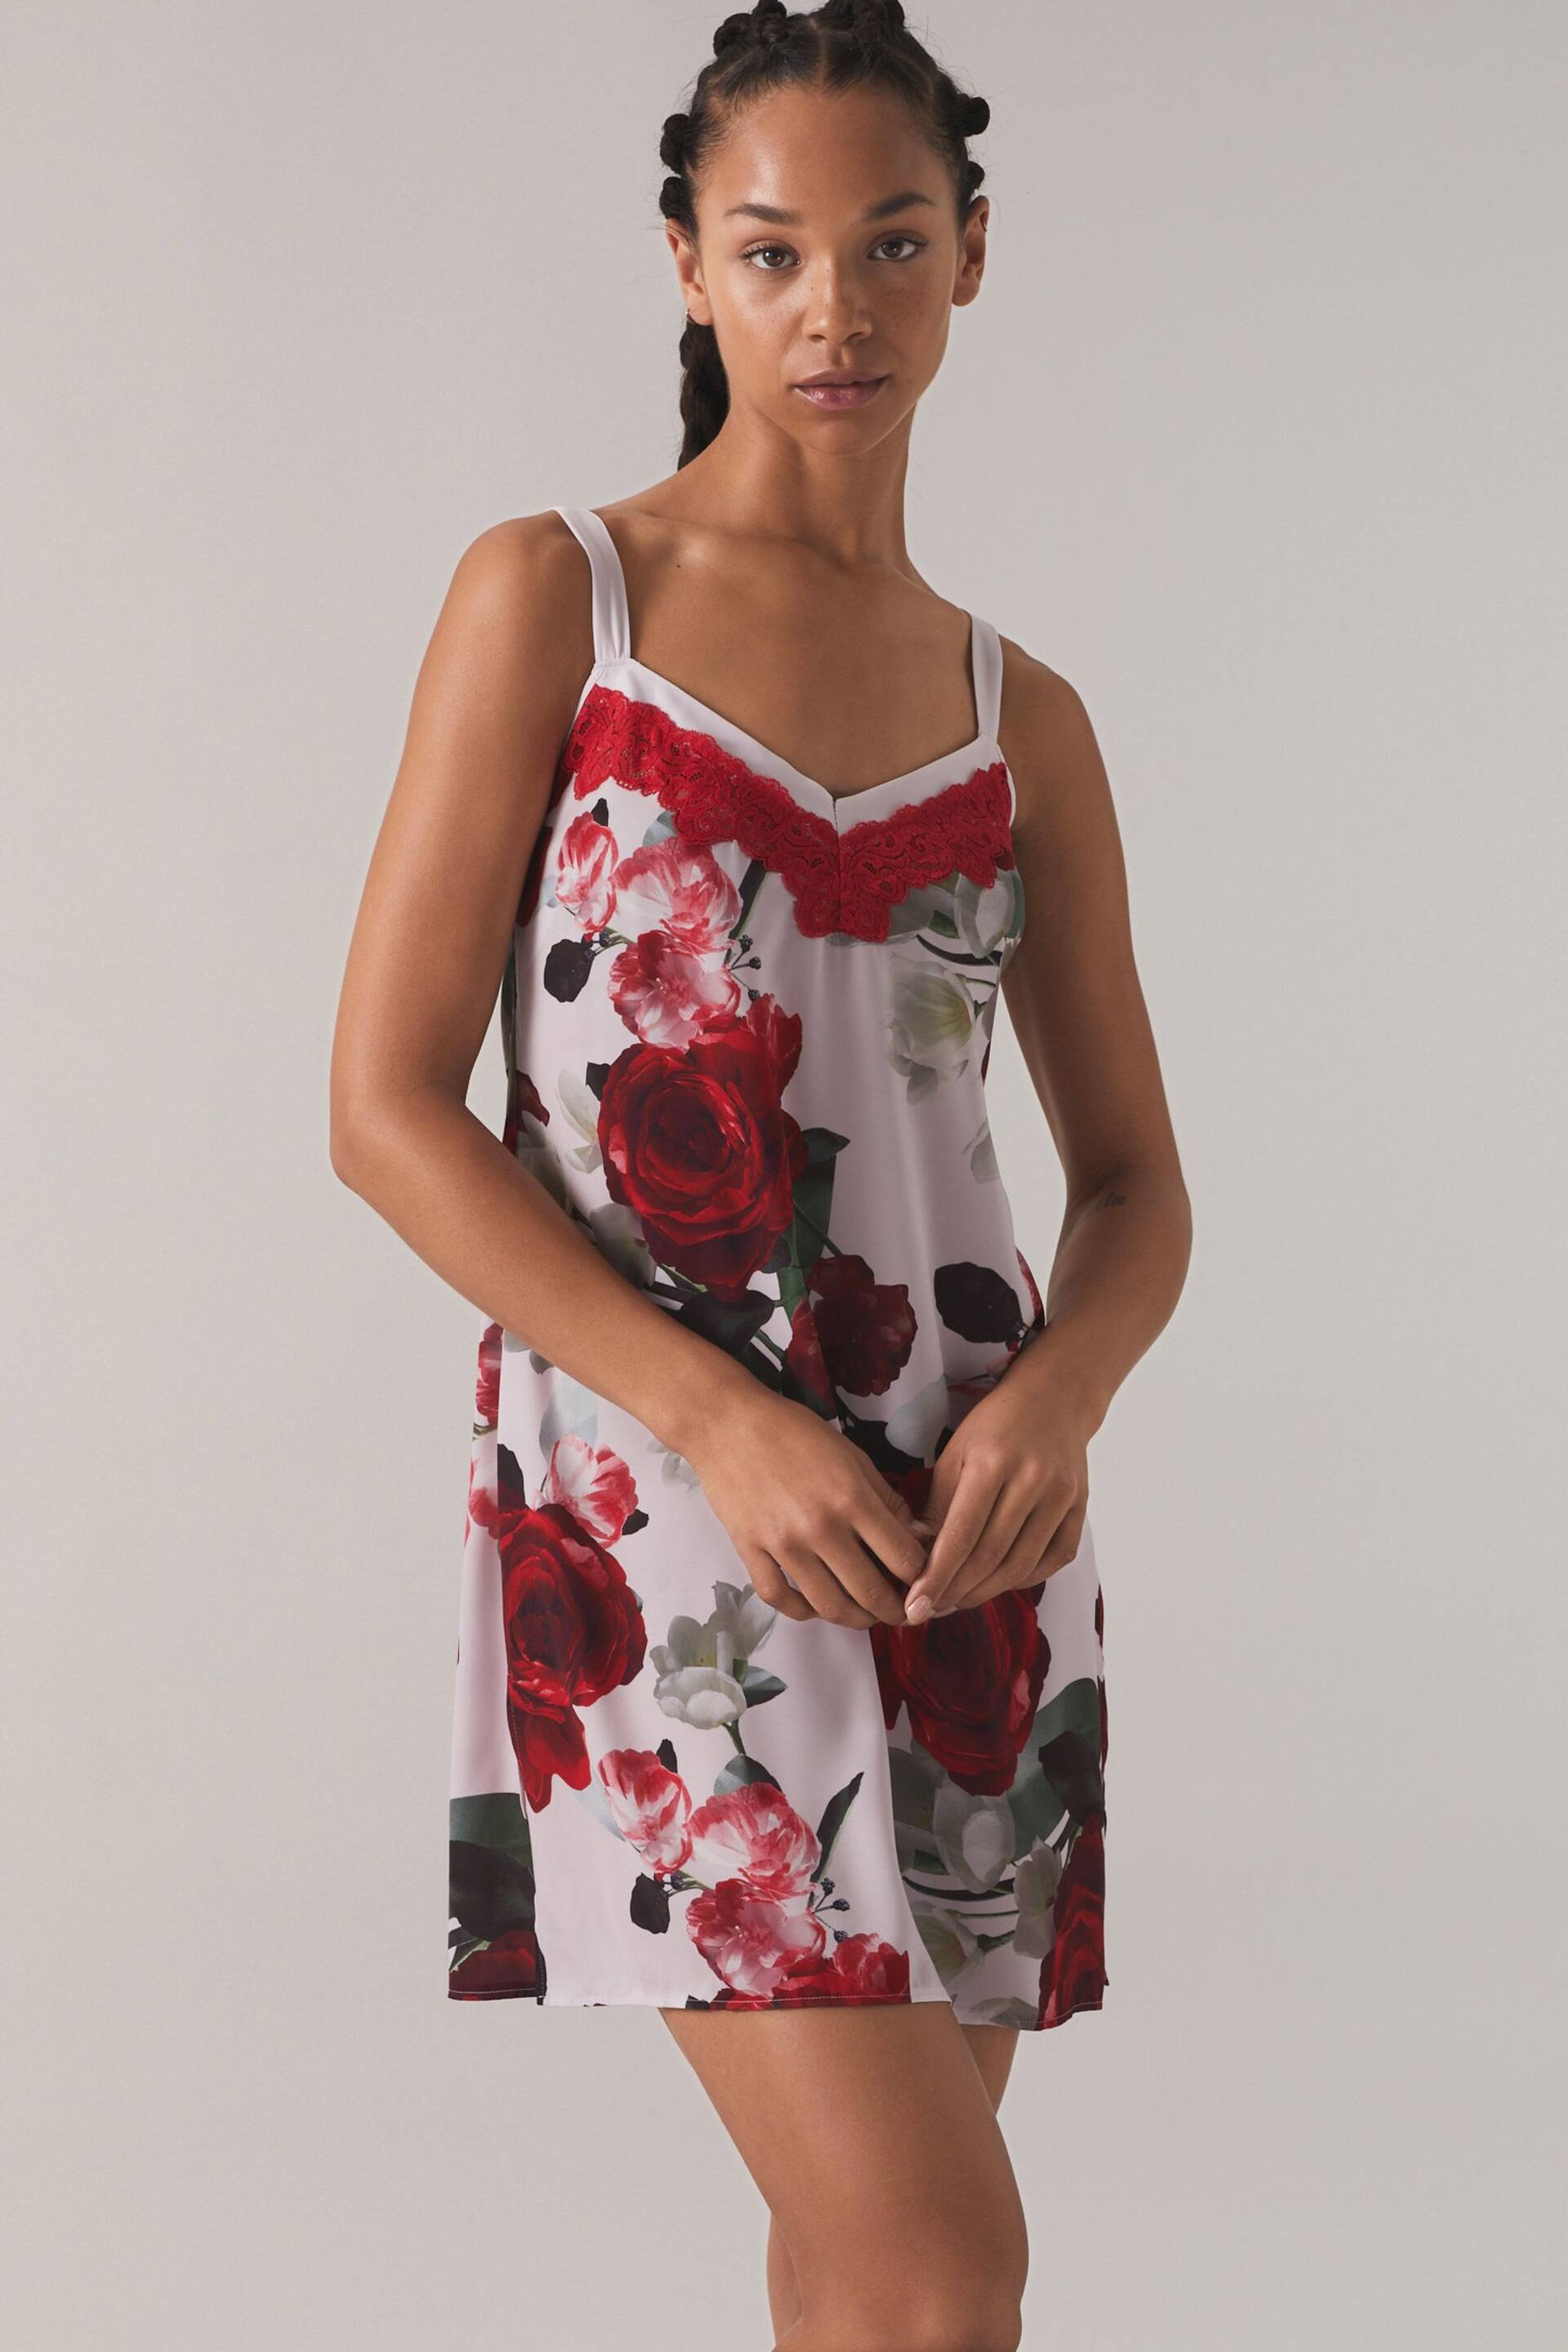 B by Ted Baker Floral Satin Lace Slip Night Dress - Image 3 of 8